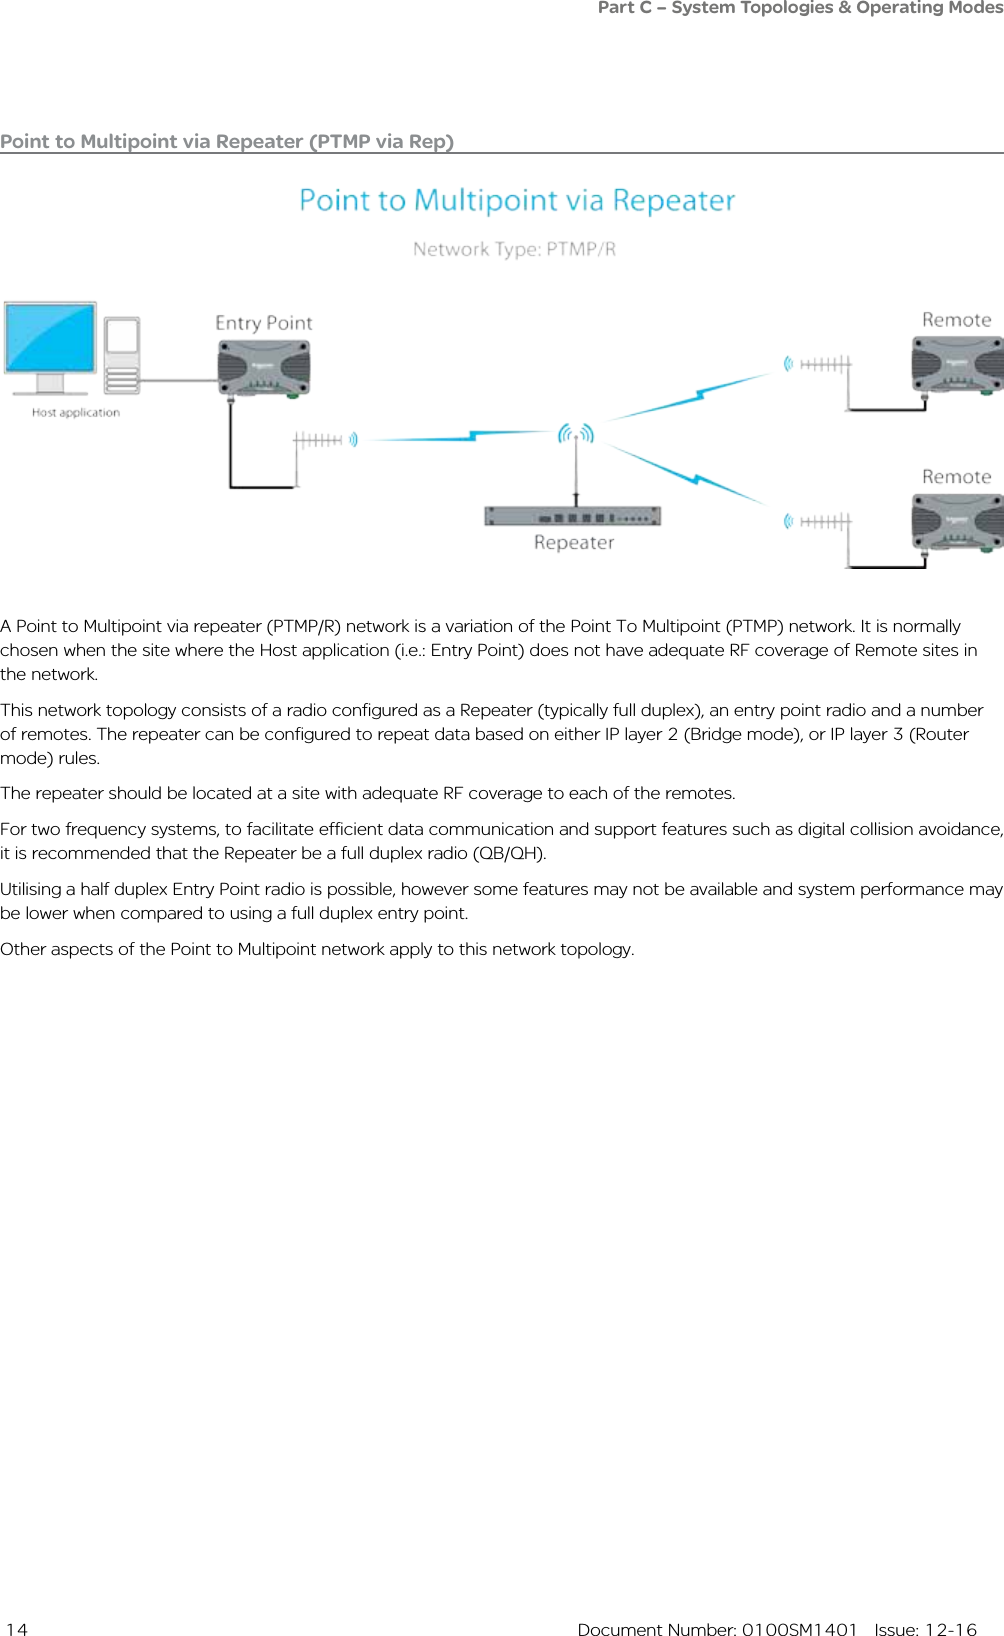  14  Document Number: 0100SM1401   Issue: 12-16Point to Multipoint via Repeater (PTMP via Rep)A Point to Multipoint via repeater (PTMP/R) network is a variation of the Point To Multipoint (PTMP) network. It is normally chosen when the site where the Host application (i.e.: Entry Point) does not have adequate RF coverage of Remote sites in the network. This network topology consists of a radio configured as a Repeater (typically full duplex), an entry point radio and a number of remotes. The repeater can be configured to repeat data based on either IP layer 2 (Bridge mode), or IP layer 3 (Router mode) rules. The repeater should be located at a site with adequate RF coverage to each of the remotes. For two frequency systems, to facilitate efficient data communication and support features such as digital collision avoidance, it is recommended that the Repeater be a full duplex radio (QB/QH). Utilising a half duplex Entry Point radio is possible, however some features may not be available and system performance may be lower when compared to using a full duplex entry point.Other aspects of the Point to Multipoint network apply to this network topology.Part C – System Topologies &amp; Operating Modes